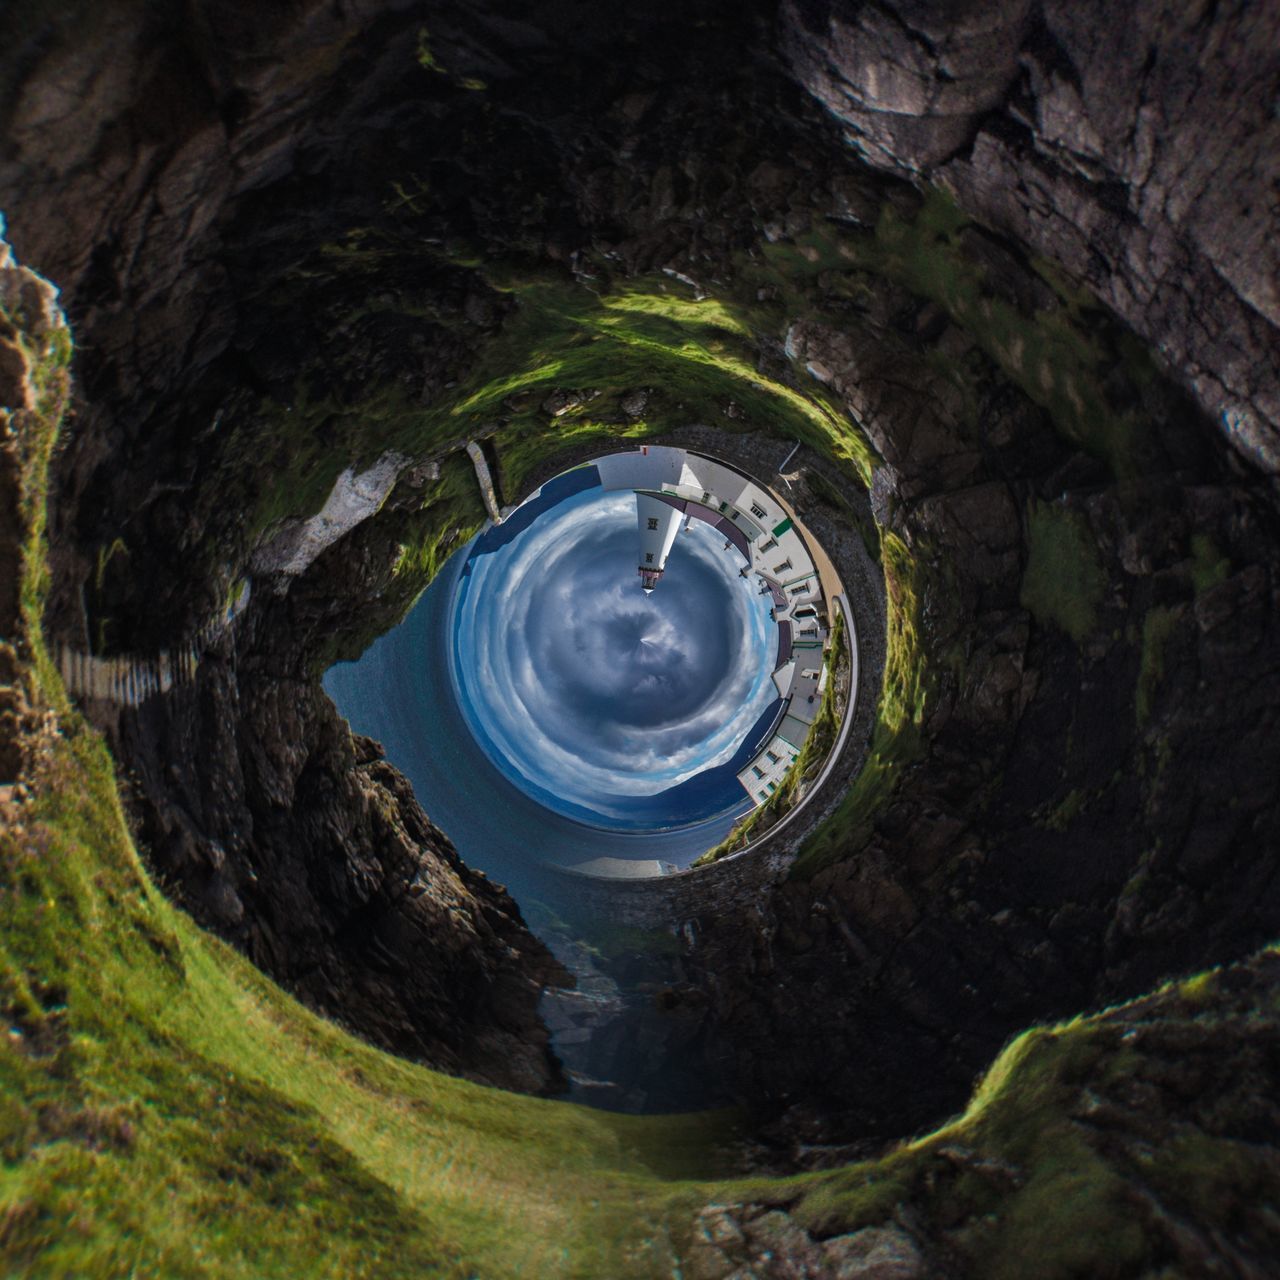 circle, shape, tree, geometric shape, nature, day, no people, outdoors, high angle view, land, water, plant, beauty in nature, green color, forest, environment, blue, hole, motion, digital composite, power in nature